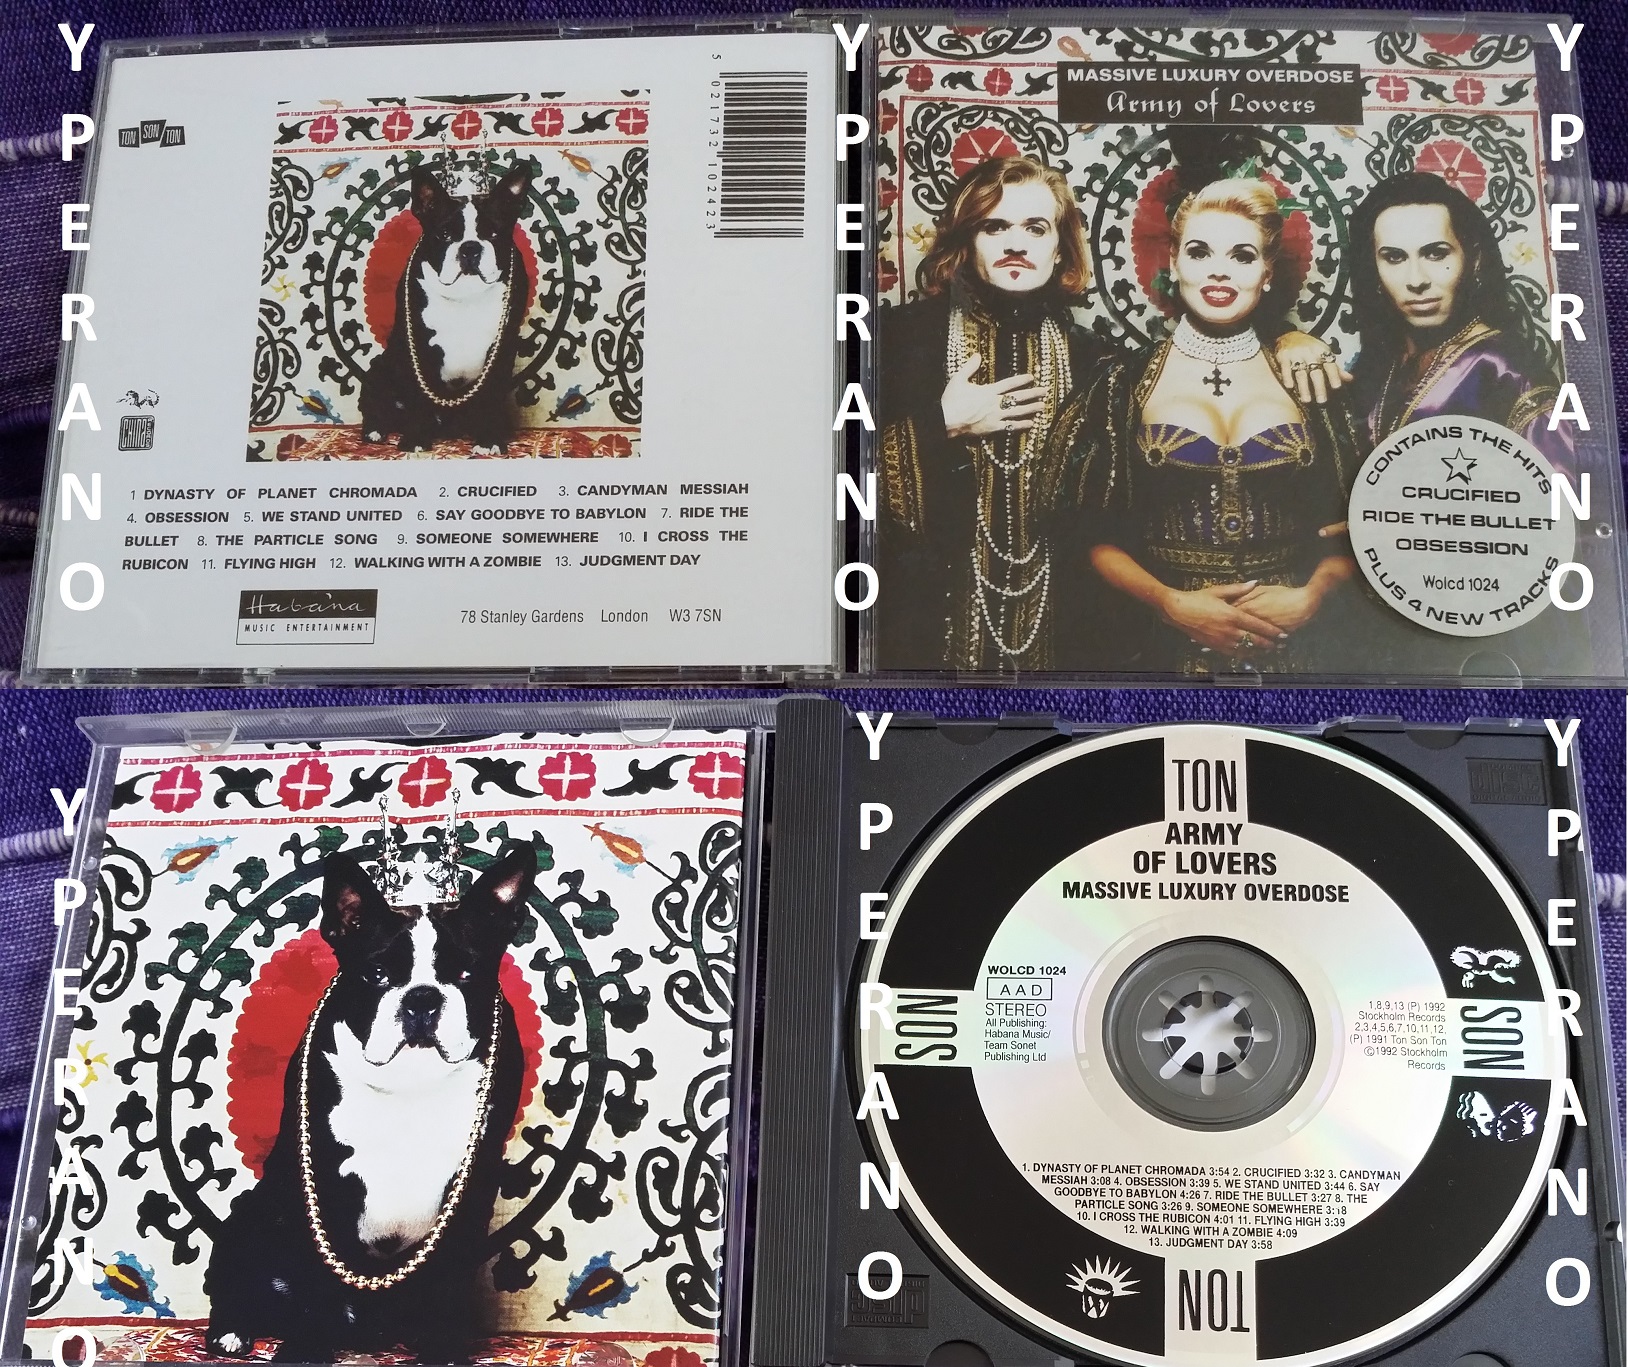 Army of lovers песня про украину. Army of lovers massive Luxury Overdose 1991. Army of lovers massive Luxury Overdose. Army of lovers 1992 - Obsession. Army of lovers 1991.